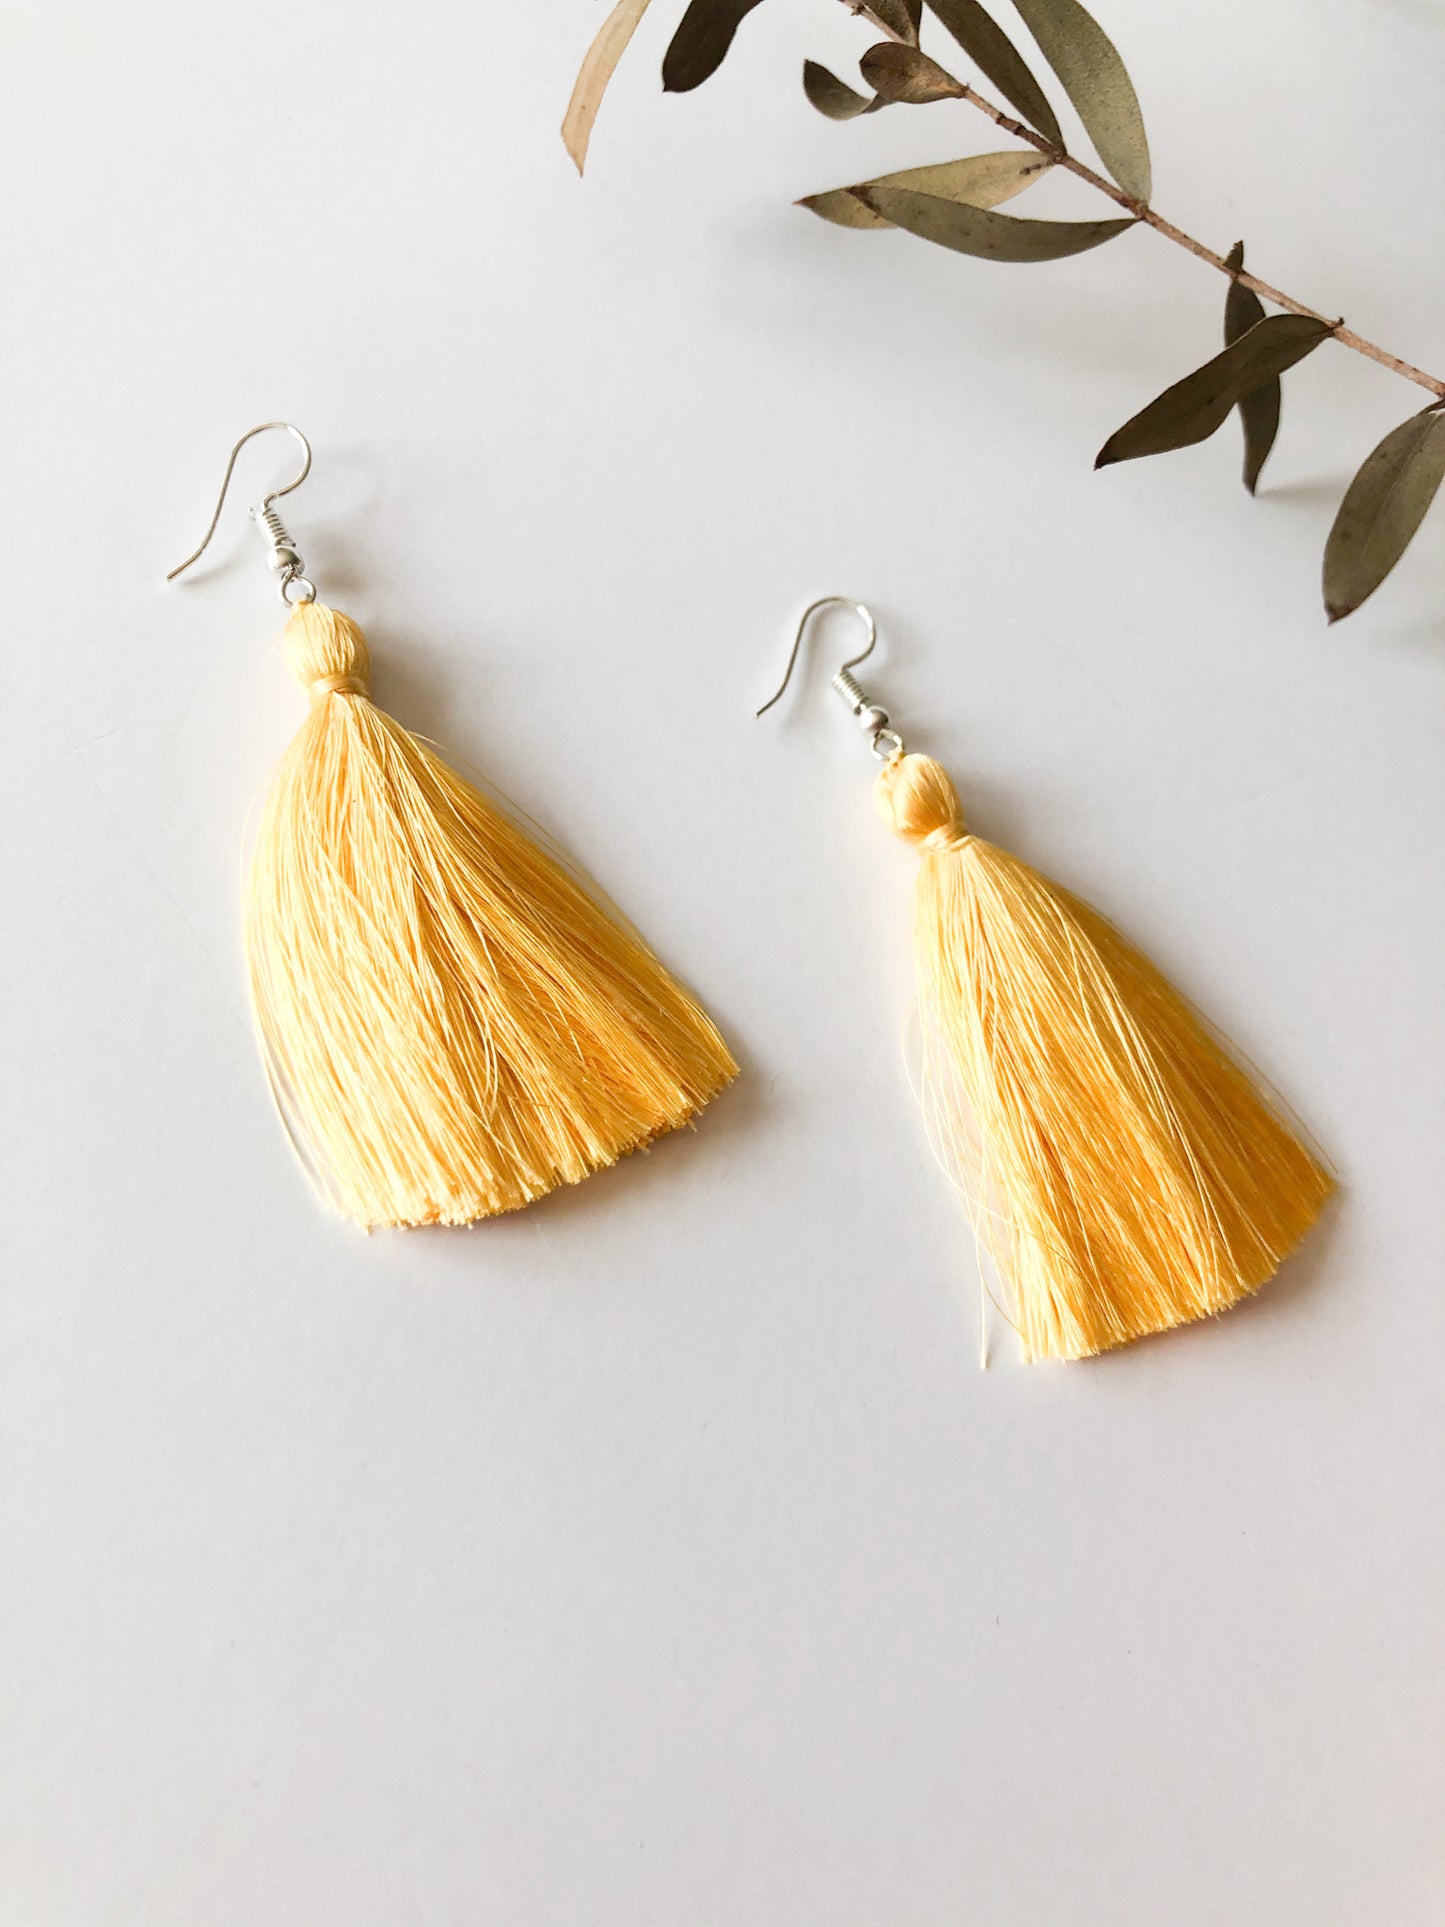 Handmade Recycled Paper & Silk Tassel Earrings Supporting Disabled Women in Laos